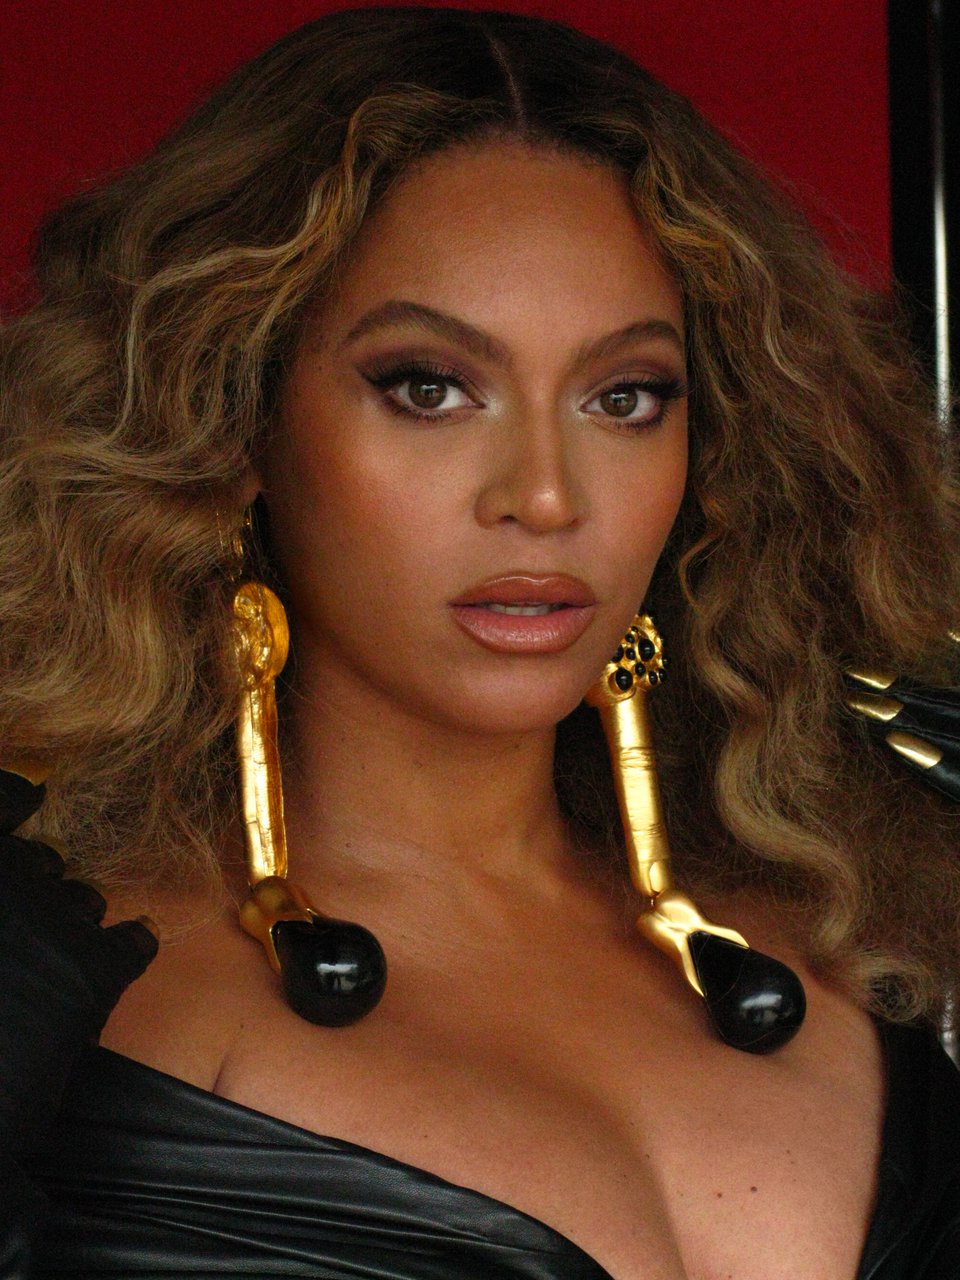 Beyoncé Ties with Jay-Z as the Most Grammy-Nominated Artist in History